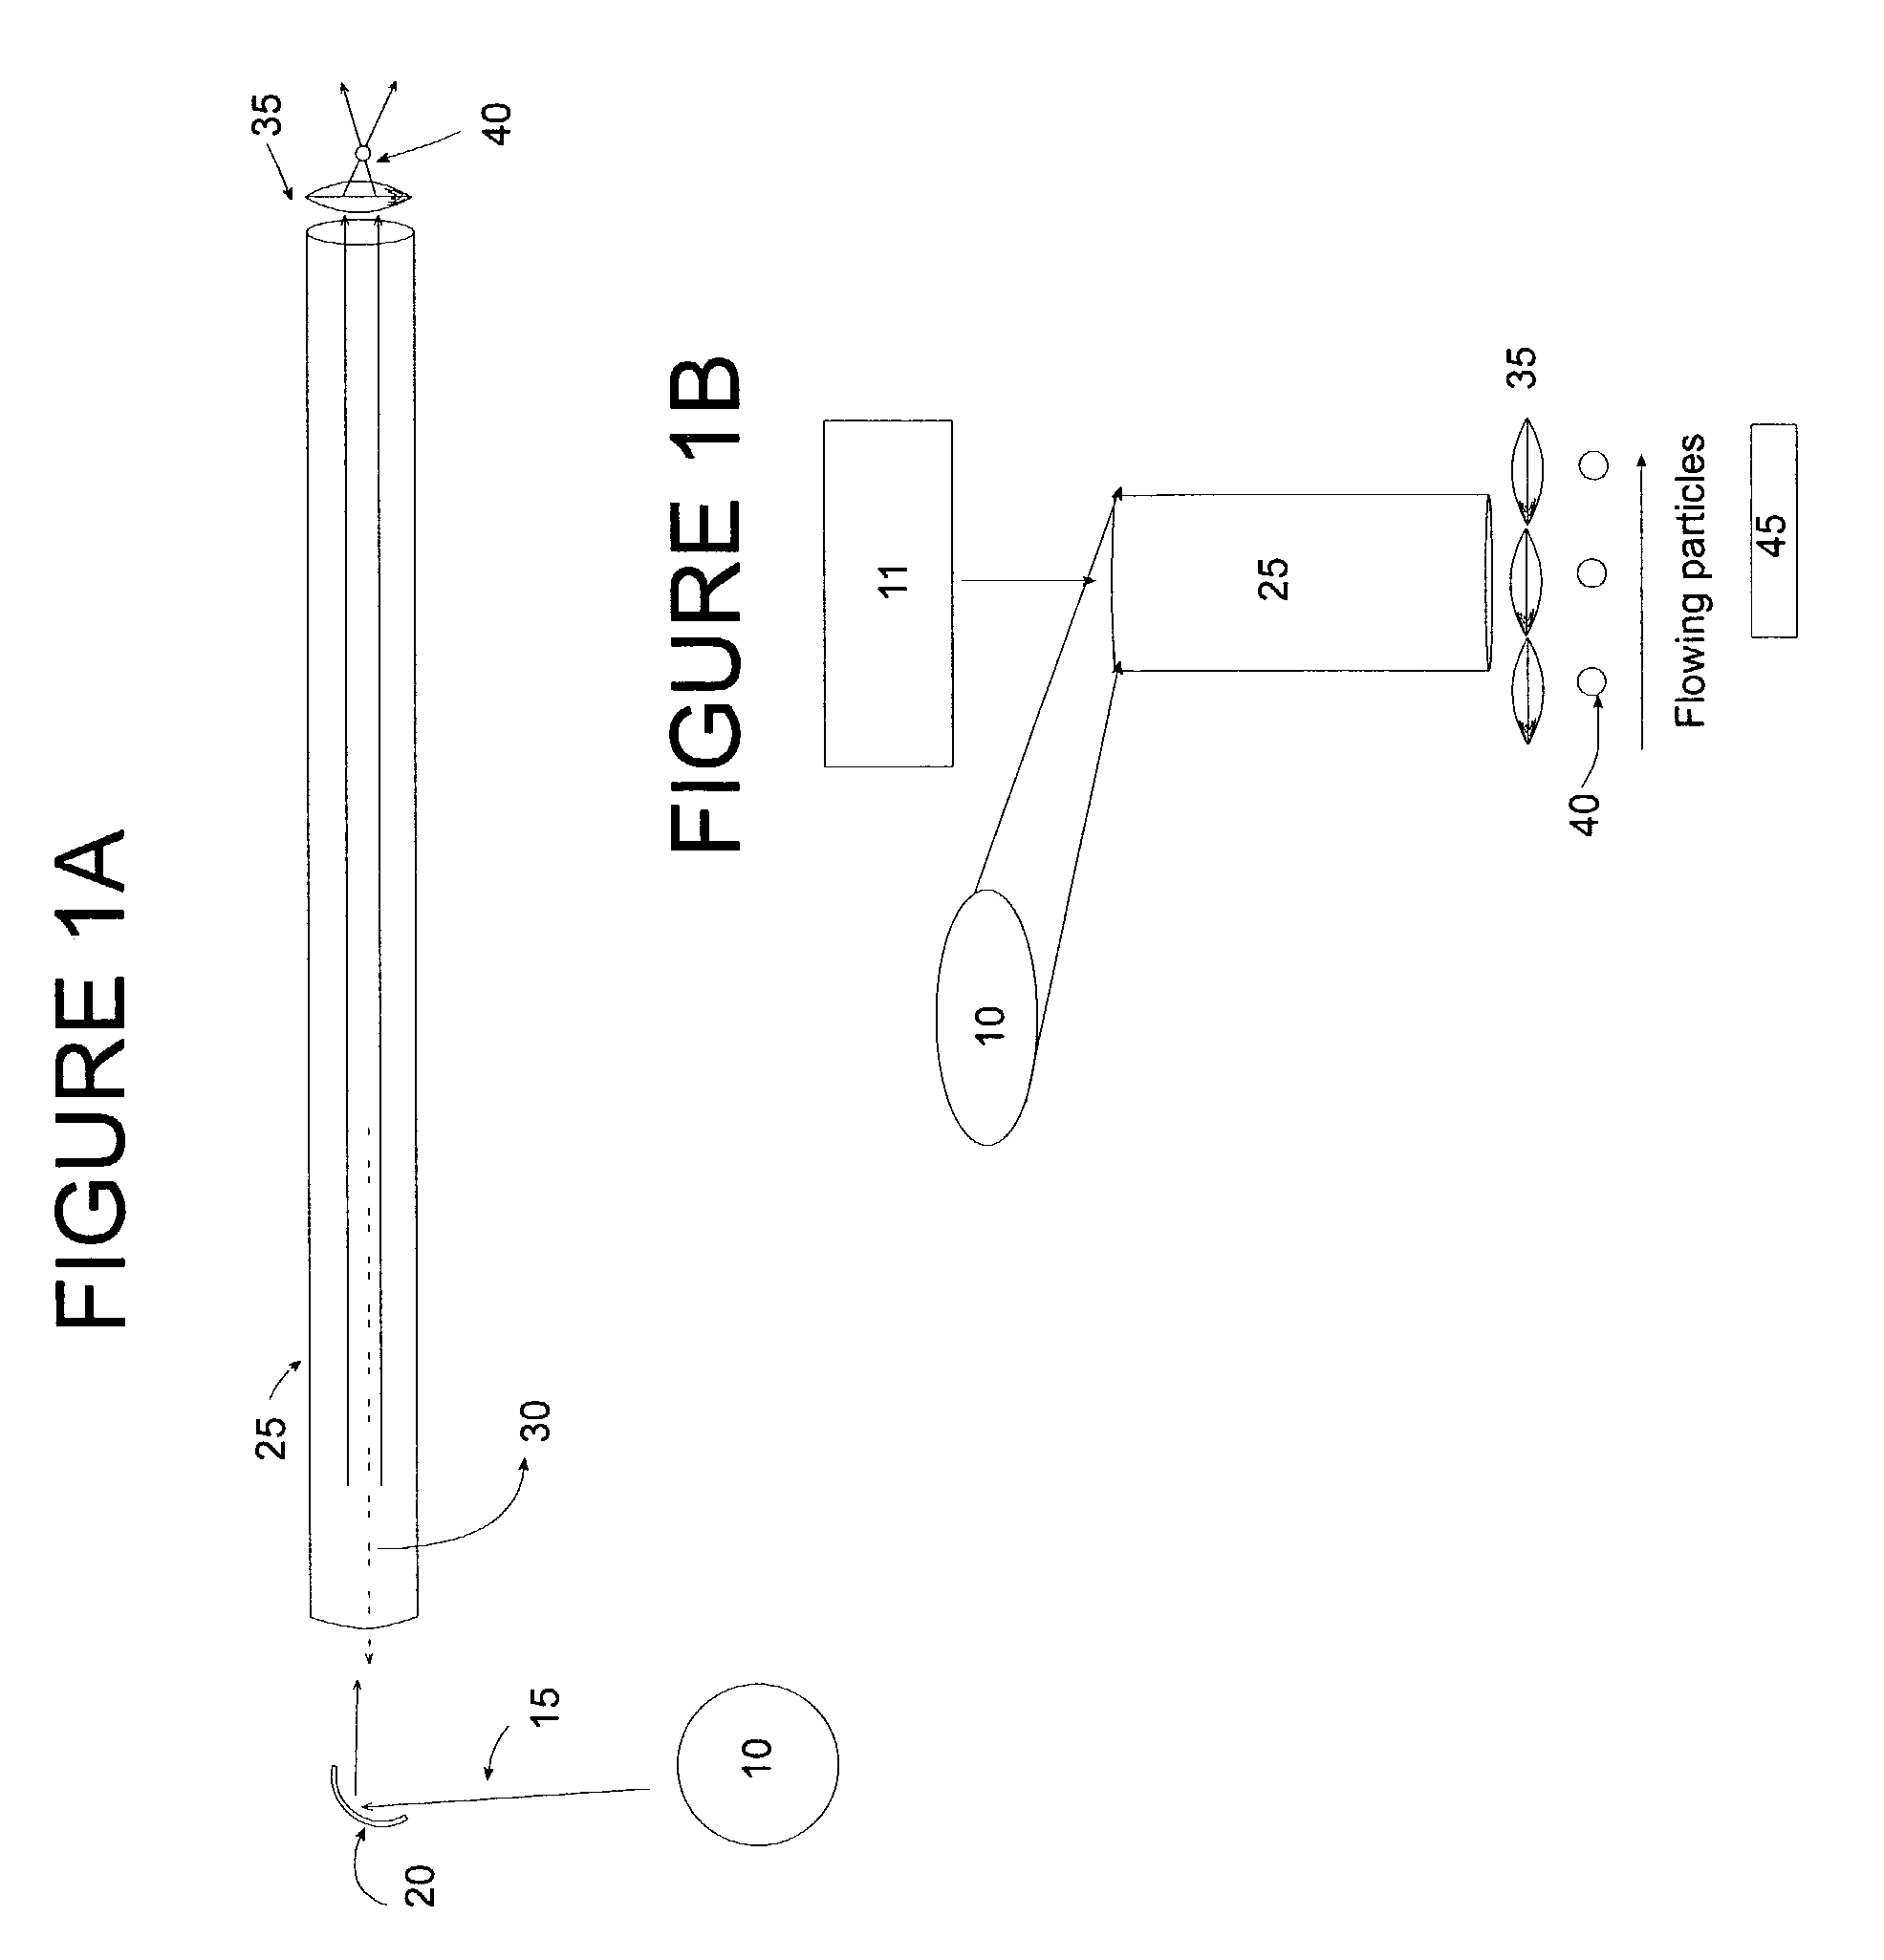 Optical array device and methods of use thereof for screening, analysis and manipulation of particles